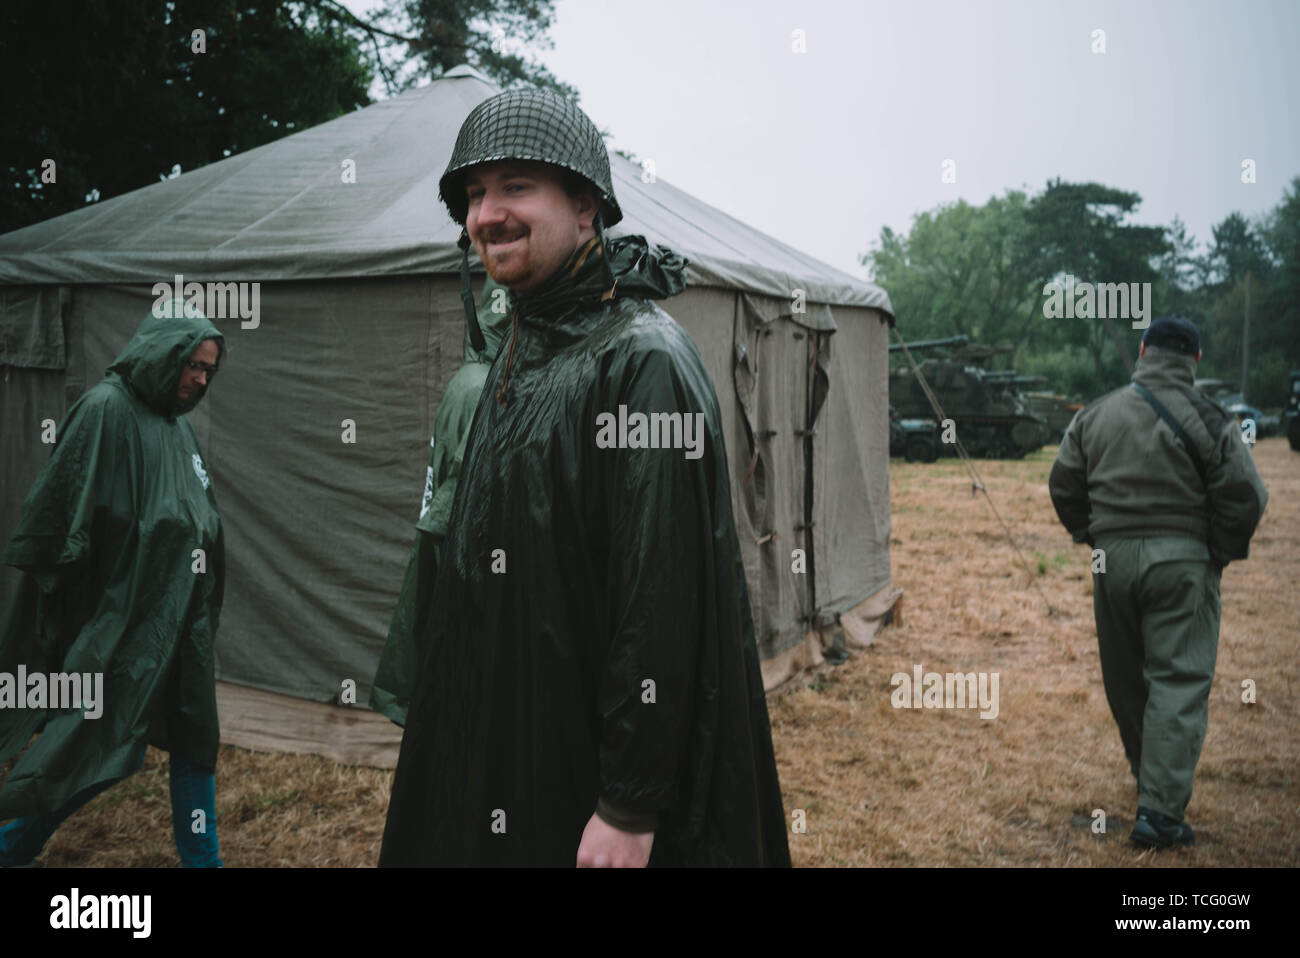 Paris, France. 4th June, 2019. People attend an event to mark the 75th anniversary of the D-Day landing in Normandy, France, June 4, 2019. Credit: Chen Yin/Xinhua/Alamy Live News Stock Photo